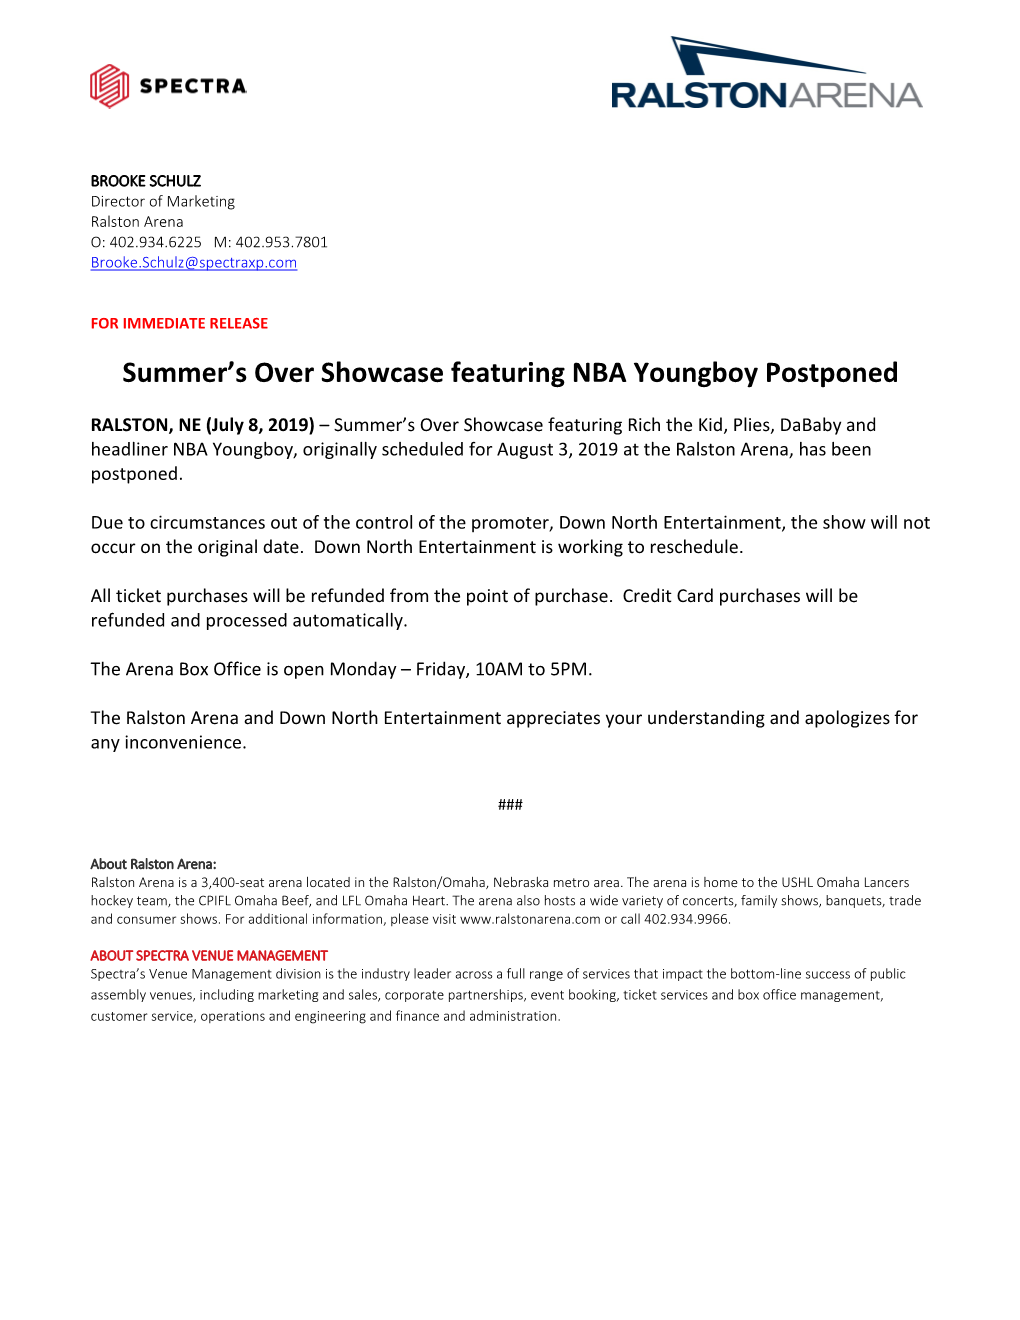 Summer's Over Showcase Featuring NBA Youngboy Postponed